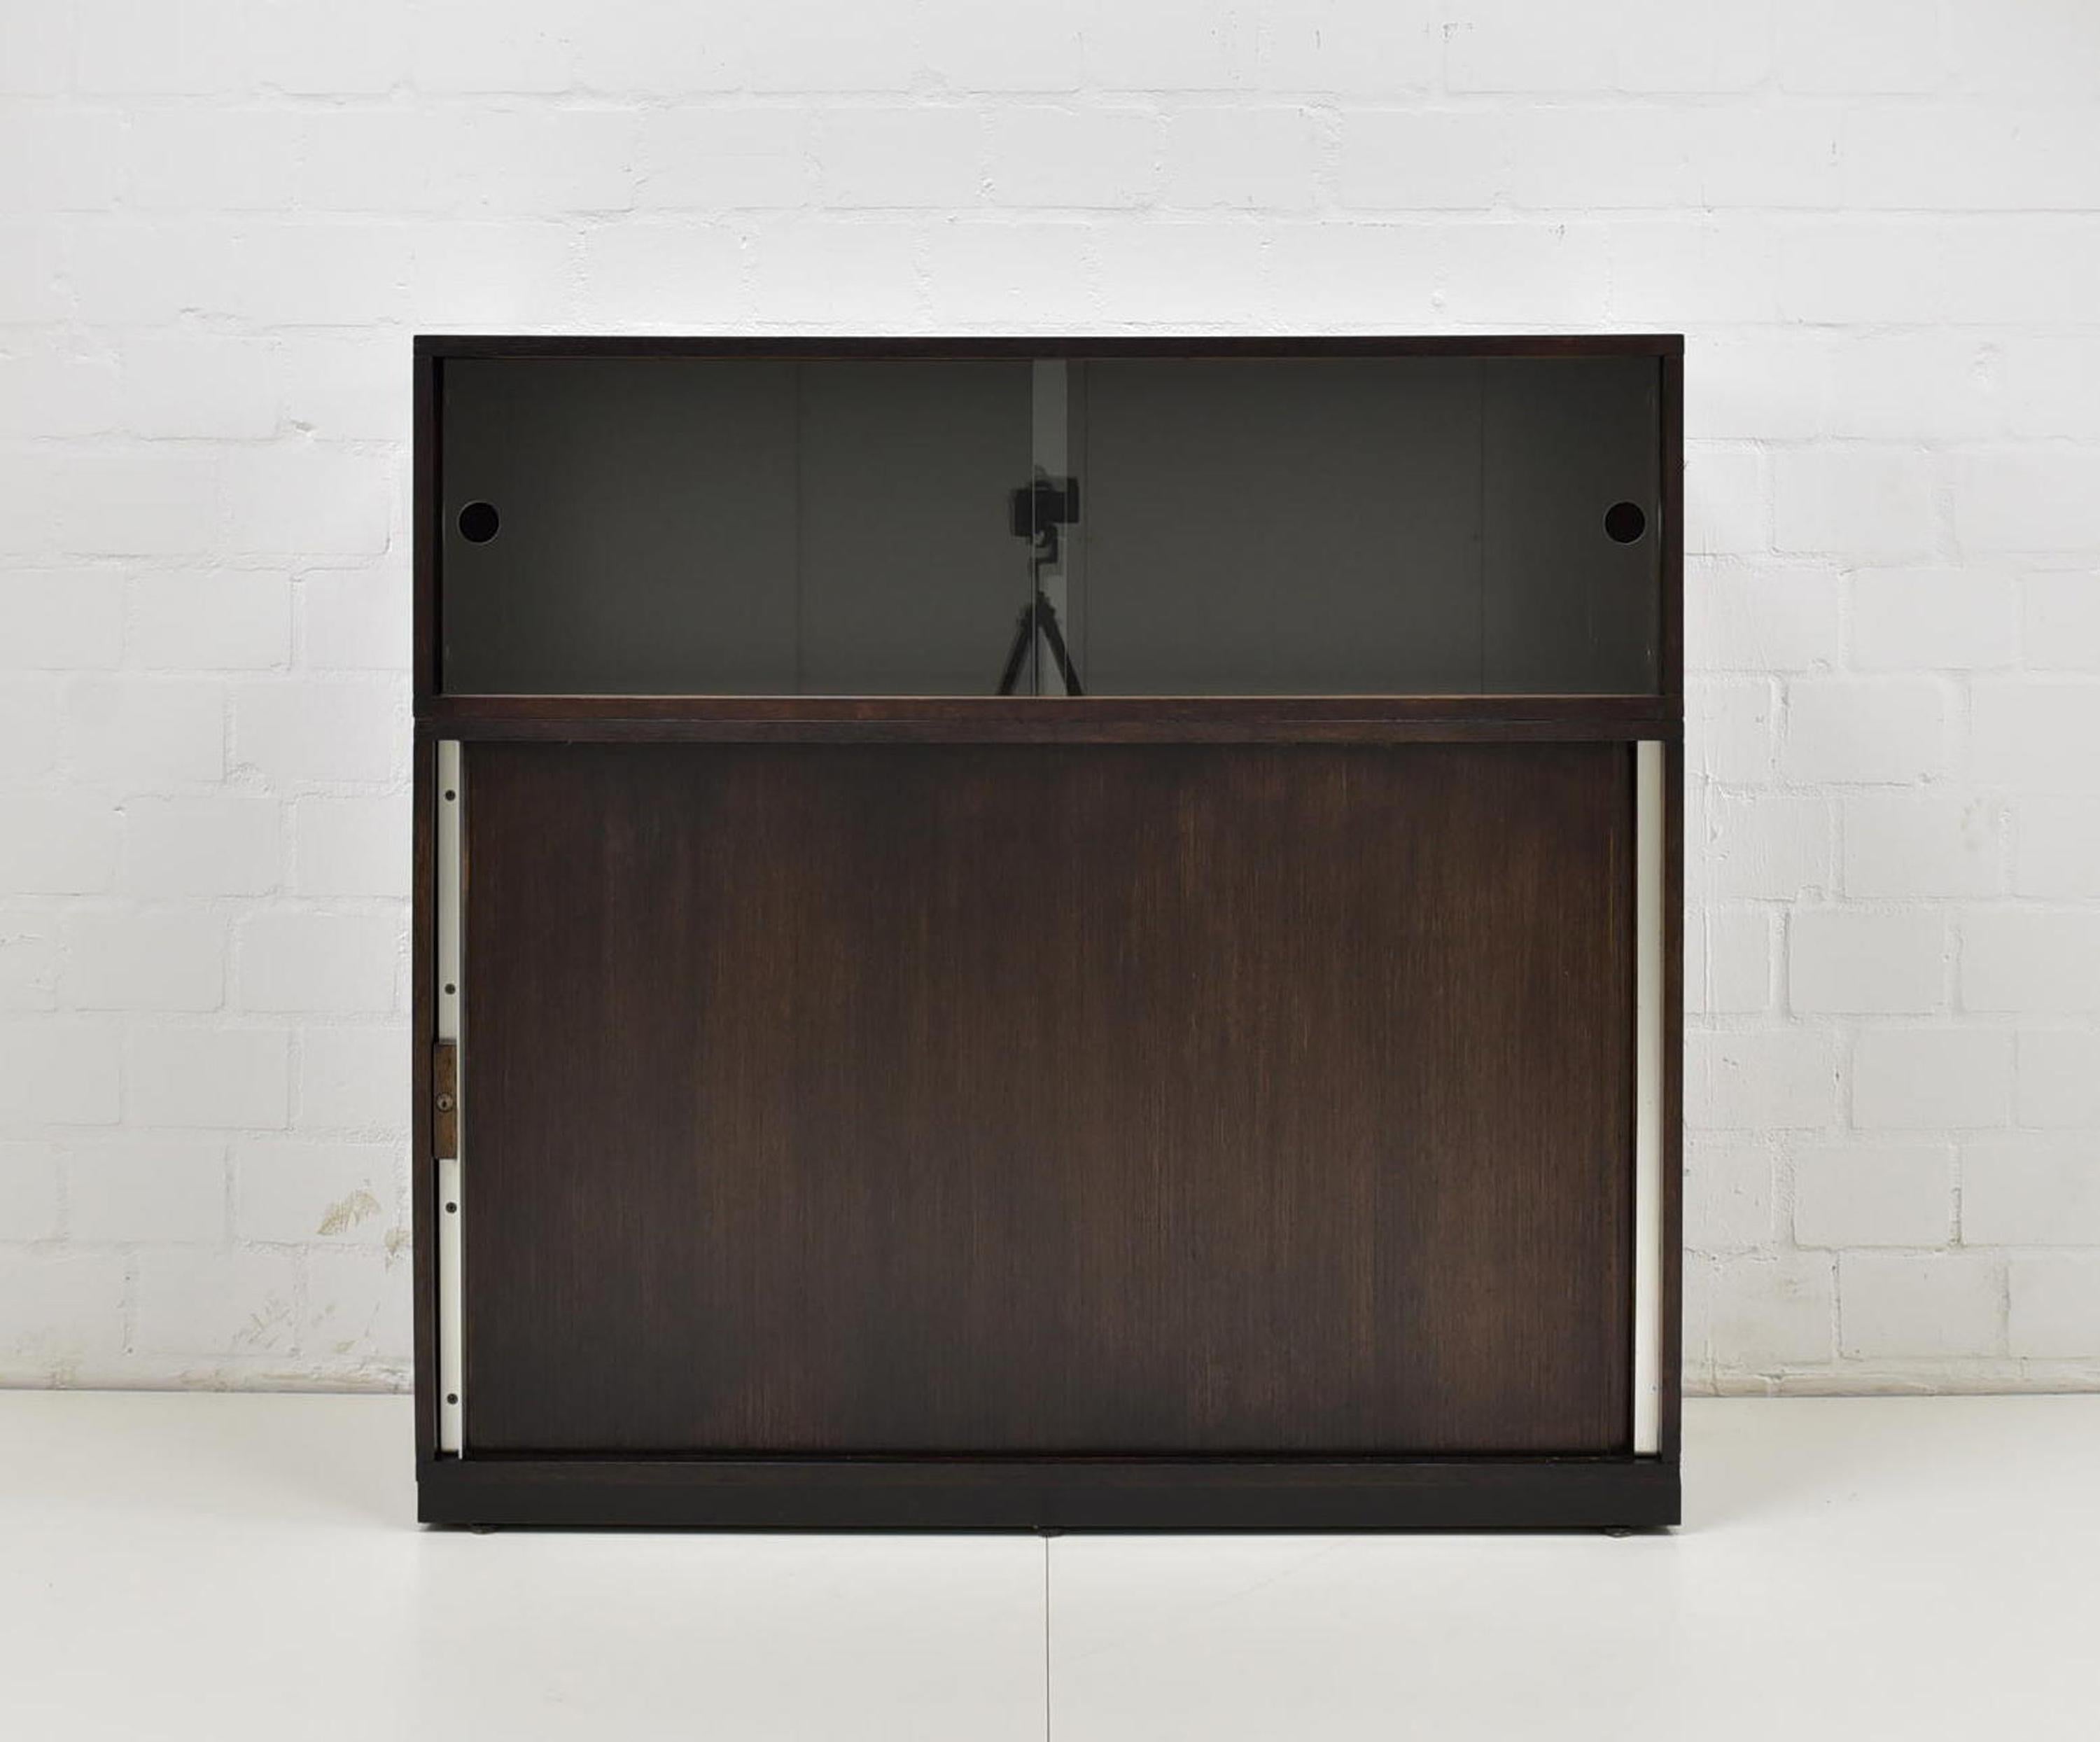 Filing cabinet restored around 1980 office cabinet sliding doors showcase office vintage

Features:
Two-part model with glass sliding doors and lamellar sliding door
Height-adjustable shelves
Smooth sliding mechanism
No-nonsense